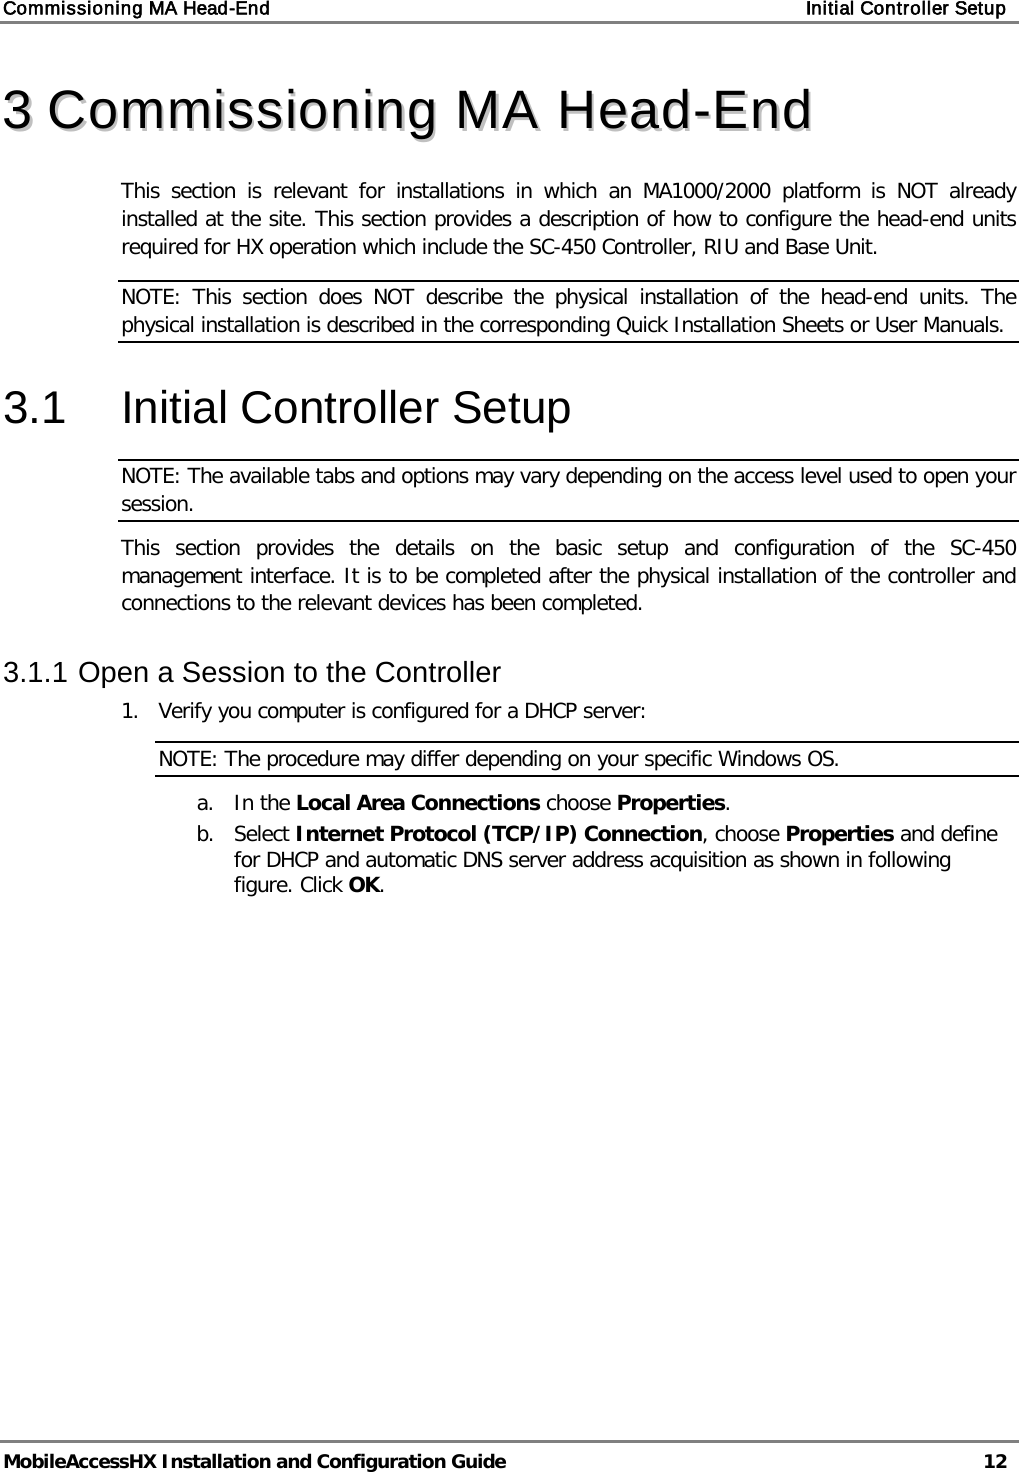 Commissioning MA Head-End    Initial Controller Setup   MobileAccessHX Installation and Configuration Guide   12  33  CCoommmmiissssiioonniinngg  MMAA  HHeeaadd--EEnndd    This section is relevant for installations in which an MA1000/2000 platform is NOT already installed at the site. This section provides a description of how to configure the head-end units required for HX operation which include the SC-450 Controller, RIU and Base Unit.  NOTE: This section does NOT describe the physical installation of the head-end units. The physical installation is described in the corresponding Quick Installation Sheets or User Manuals. 3.1  Initial Controller Setup NOTE: The available tabs and options may vary depending on the access level used to open your session. This section provides the details on the basic setup and configuration of the SC-450 management interface. It is to be completed after the physical installation of the controller and connections to the relevant devices has been completed. 3.1.1 Open a Session to the Controller 1.  Verify you computer is configured for a DHCP server: NOTE: The procedure may differ depending on your specific Windows OS. a. In the Local Area Connections choose Properties. b. Select Internet Protocol (TCP/IP) Connection, choose Properties and define for DHCP and automatic DNS server address acquisition as shown in following figure. Click OK. 